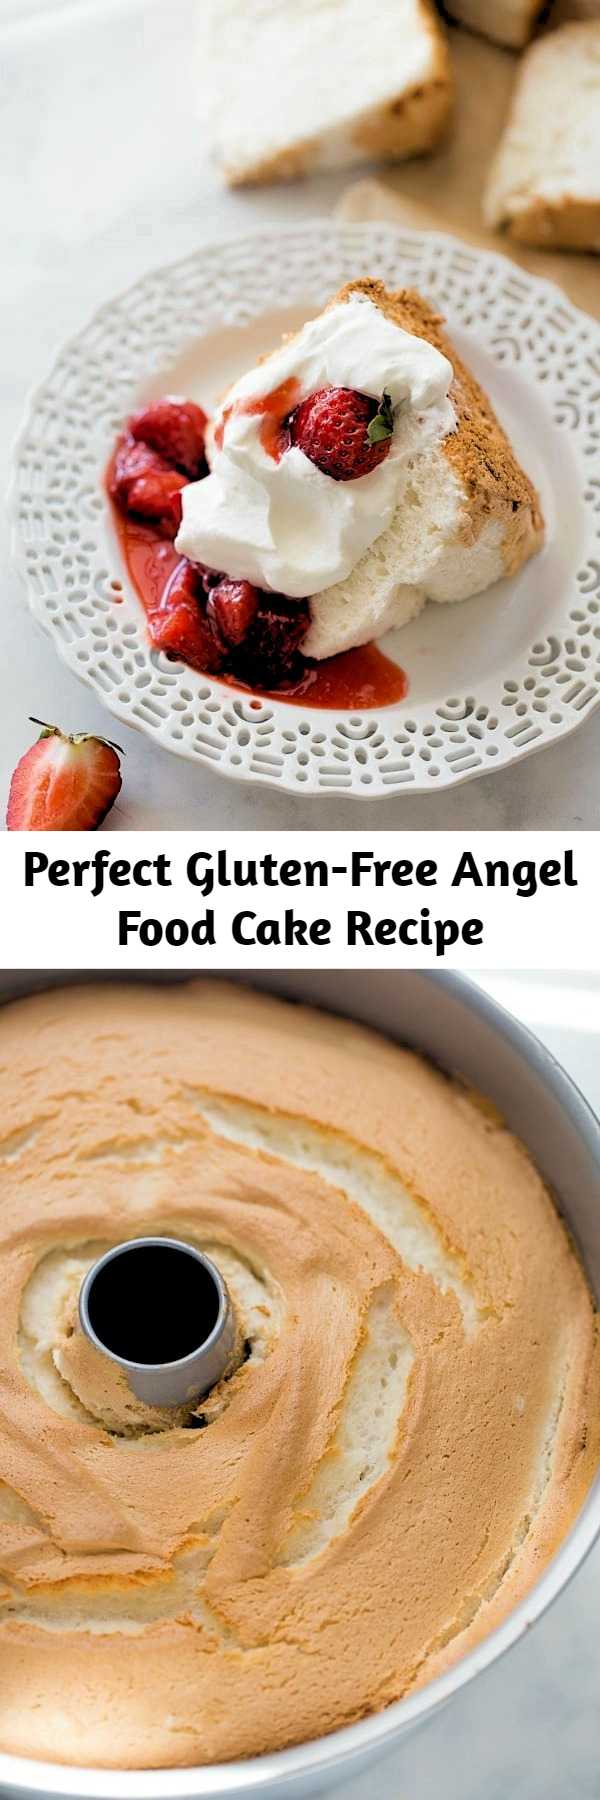 Gluten-Free Angel Food Cake! The best-tasting angel food cake you’ll ever eat. Light, fluffy and perfect for your favorite desserts. Nobody will ever guess it’s gluten-free!  #angelfoodcake #glutenfree #glutenfreedesserts #glutenfreecake #summerdesserts #glutenfreeangelfoodcake #angelfoodcakedesserts